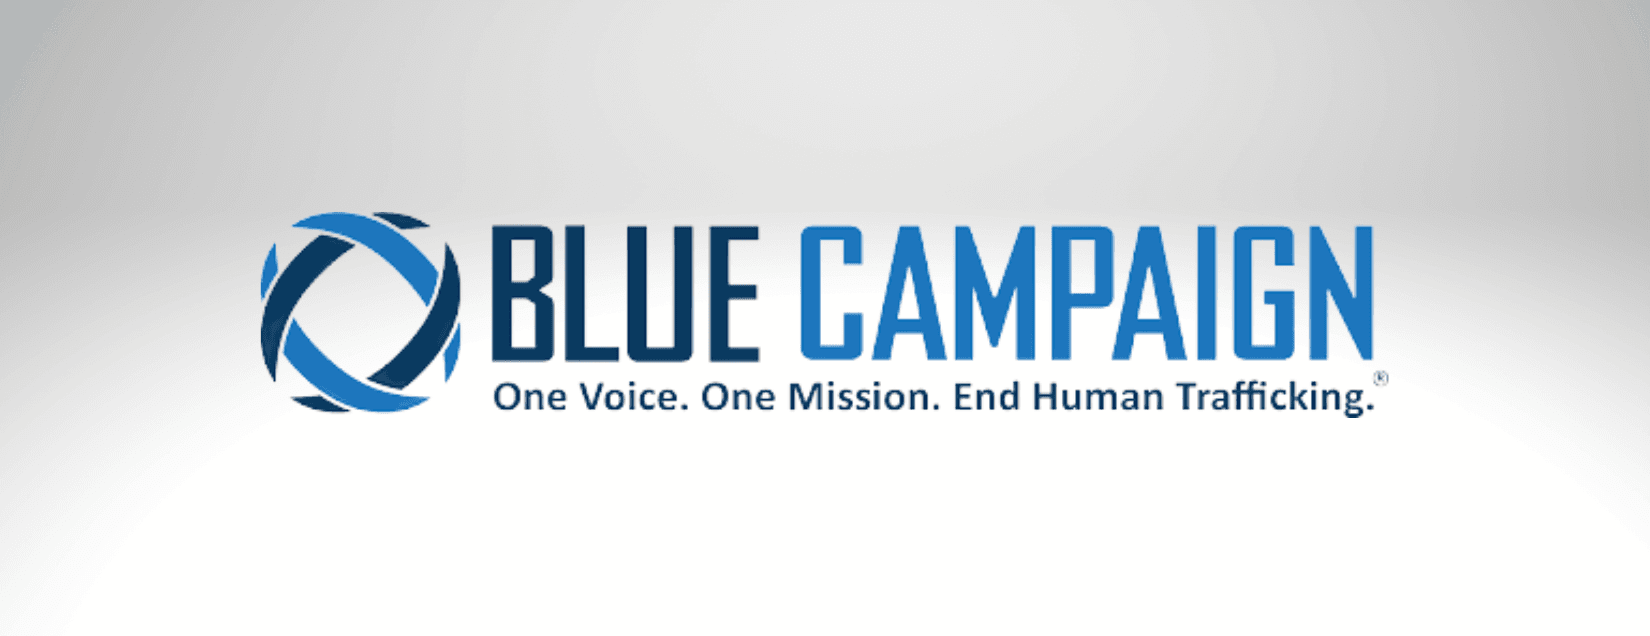 Homeland Security ~ Blue Campaign ~One Voice. One Mission. End Human Trafficking™